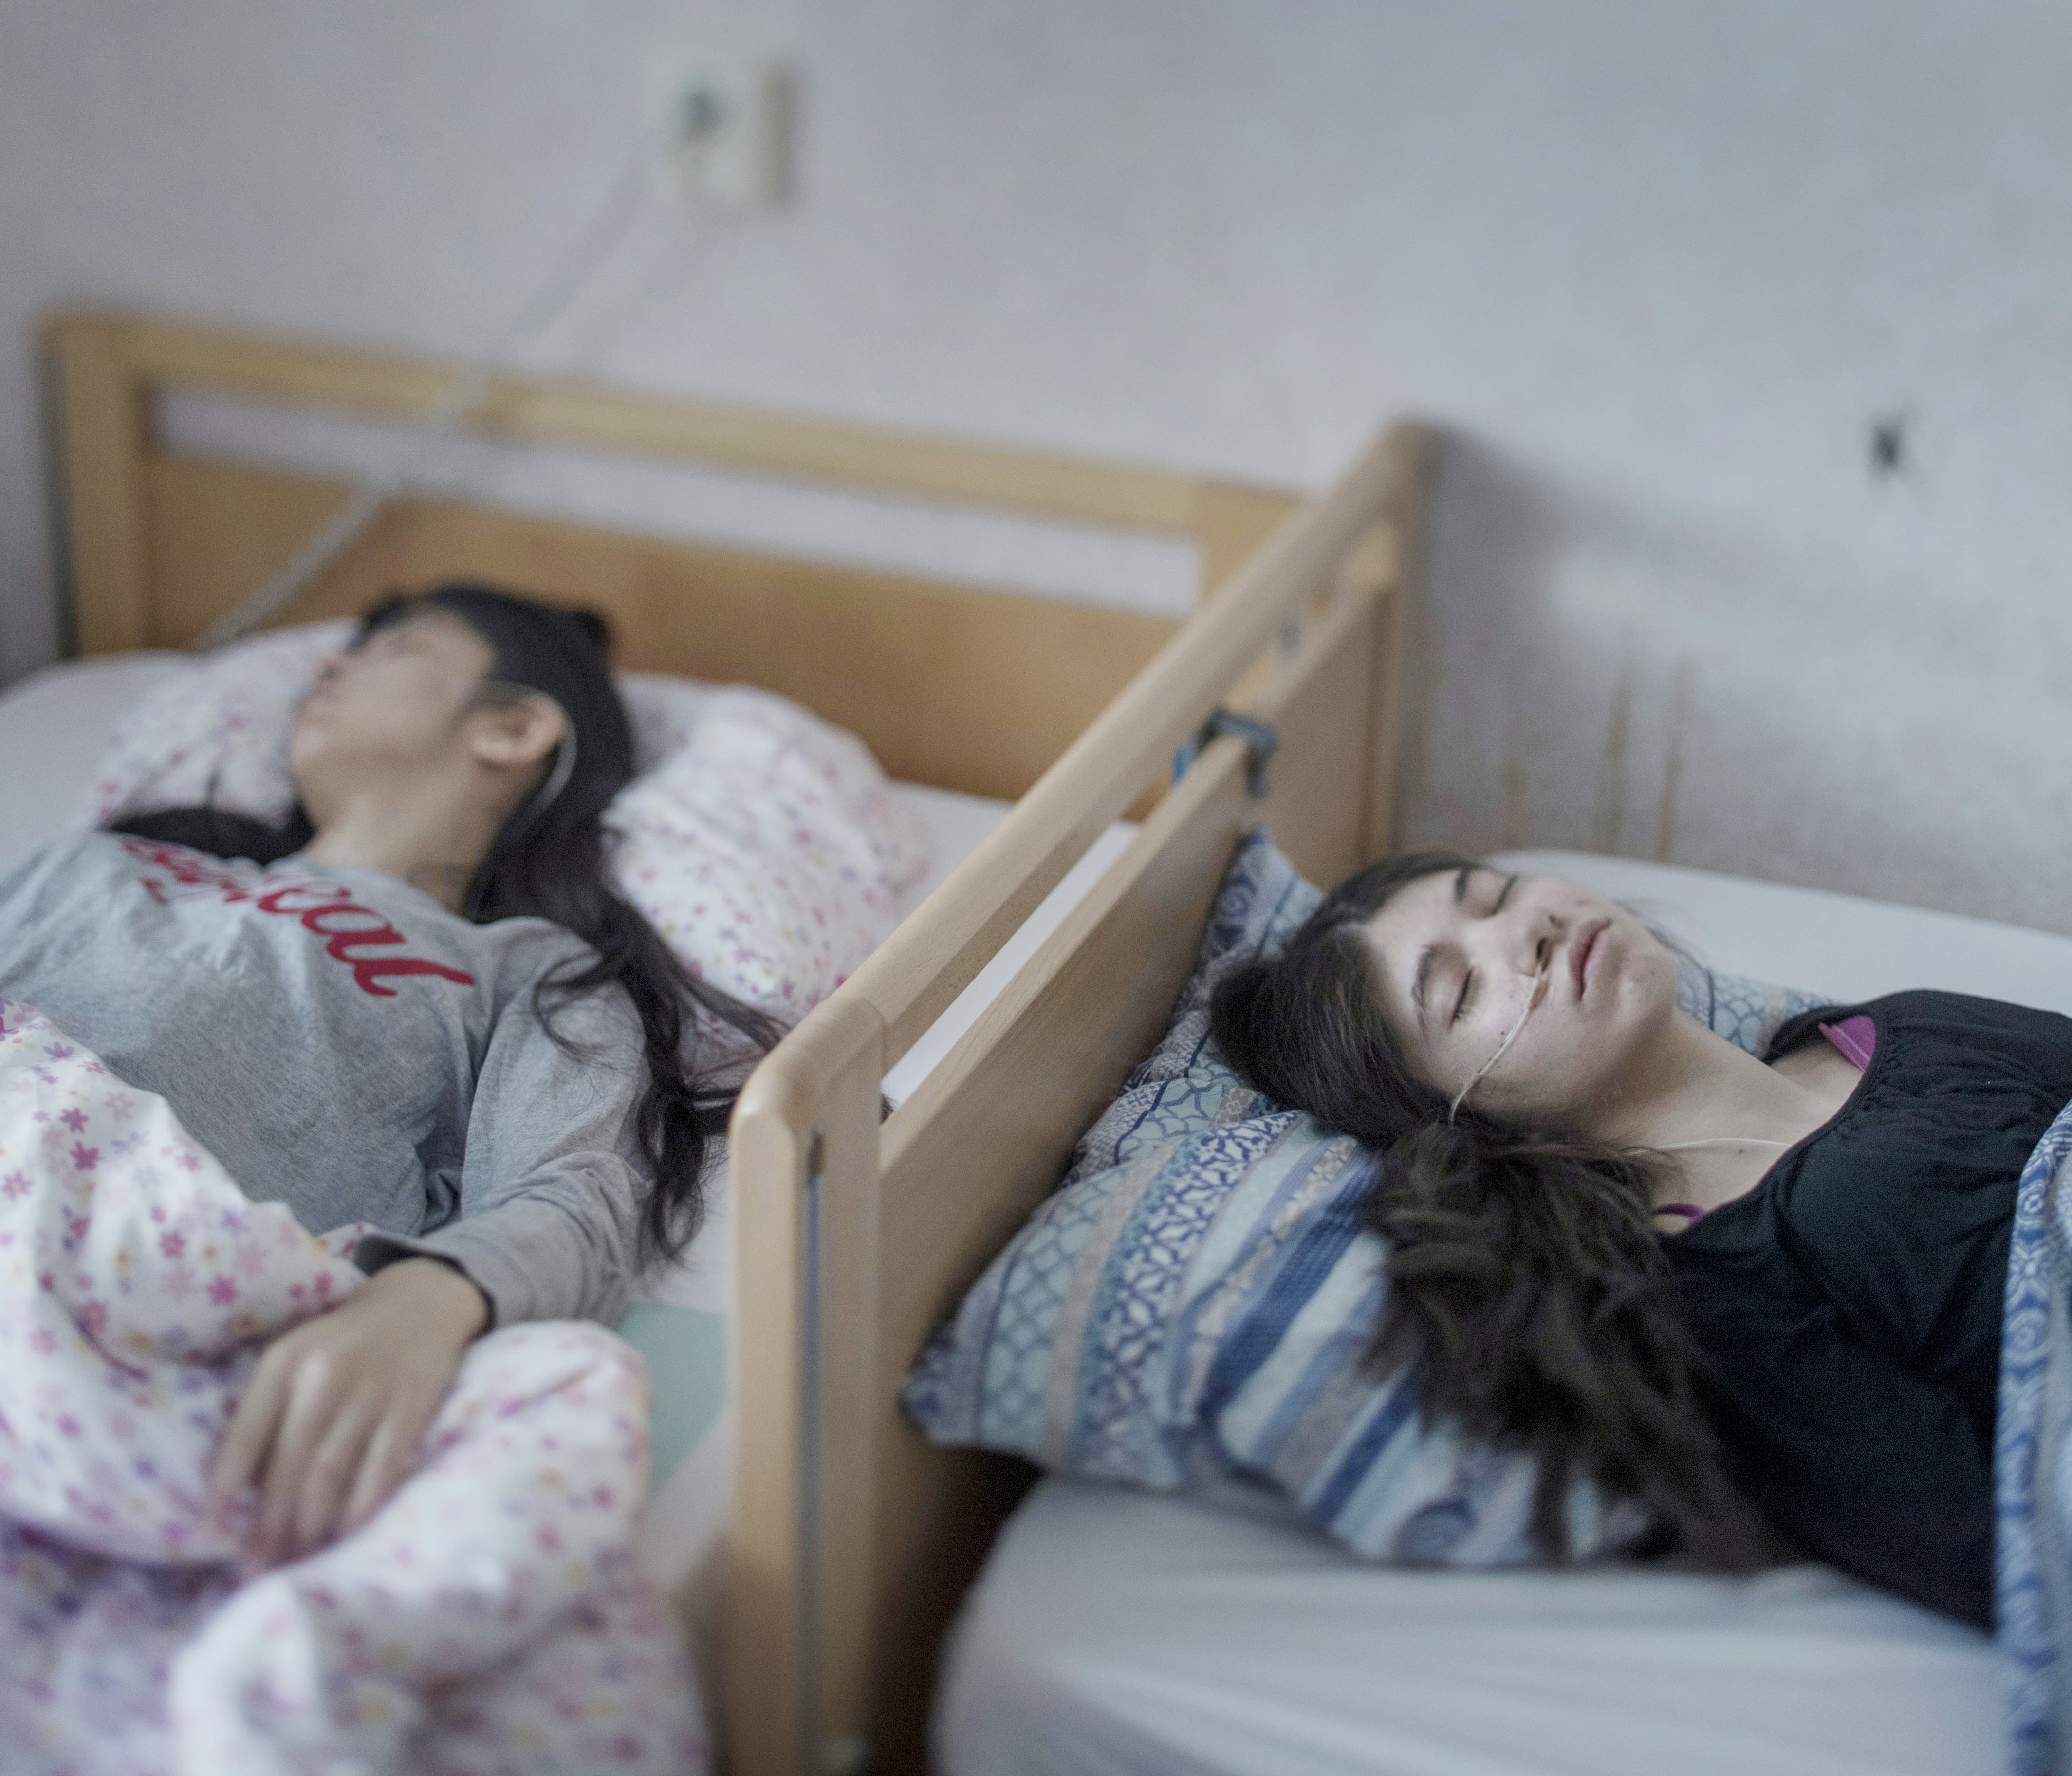 Two teenage girls lie asleep in beds touching each other, with hospital tubes in their noses.